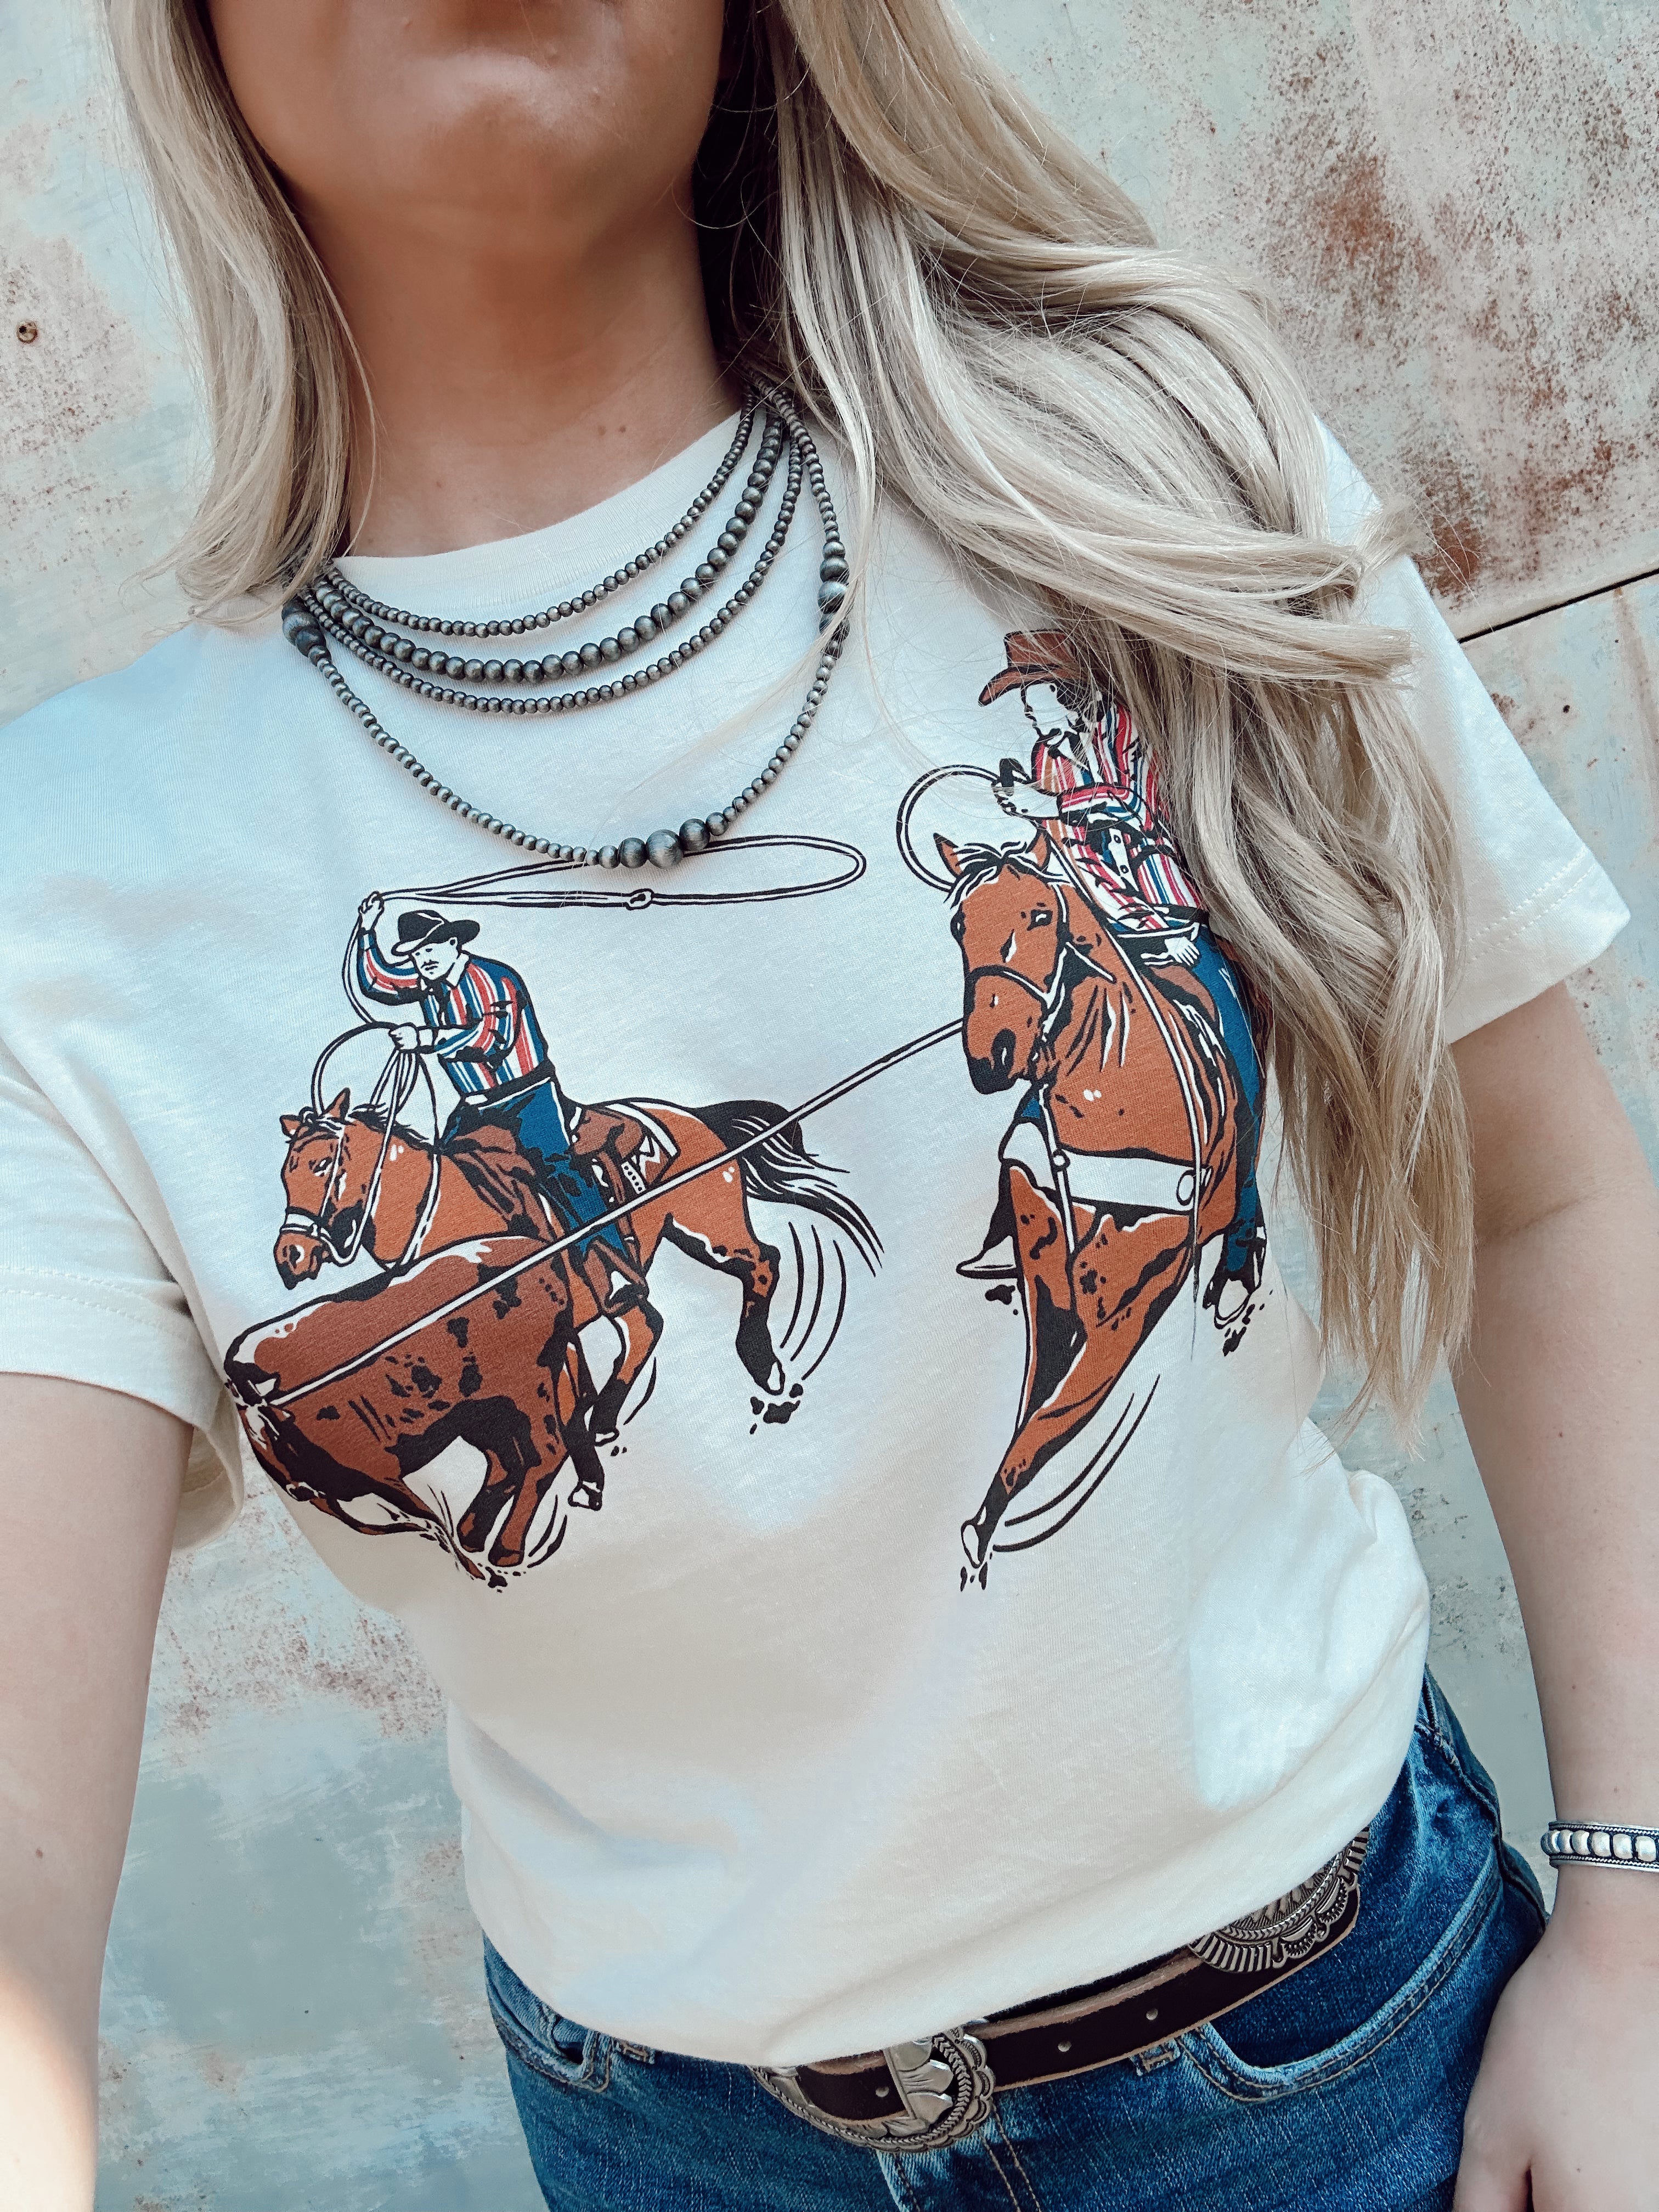 Cowgirl Necklace